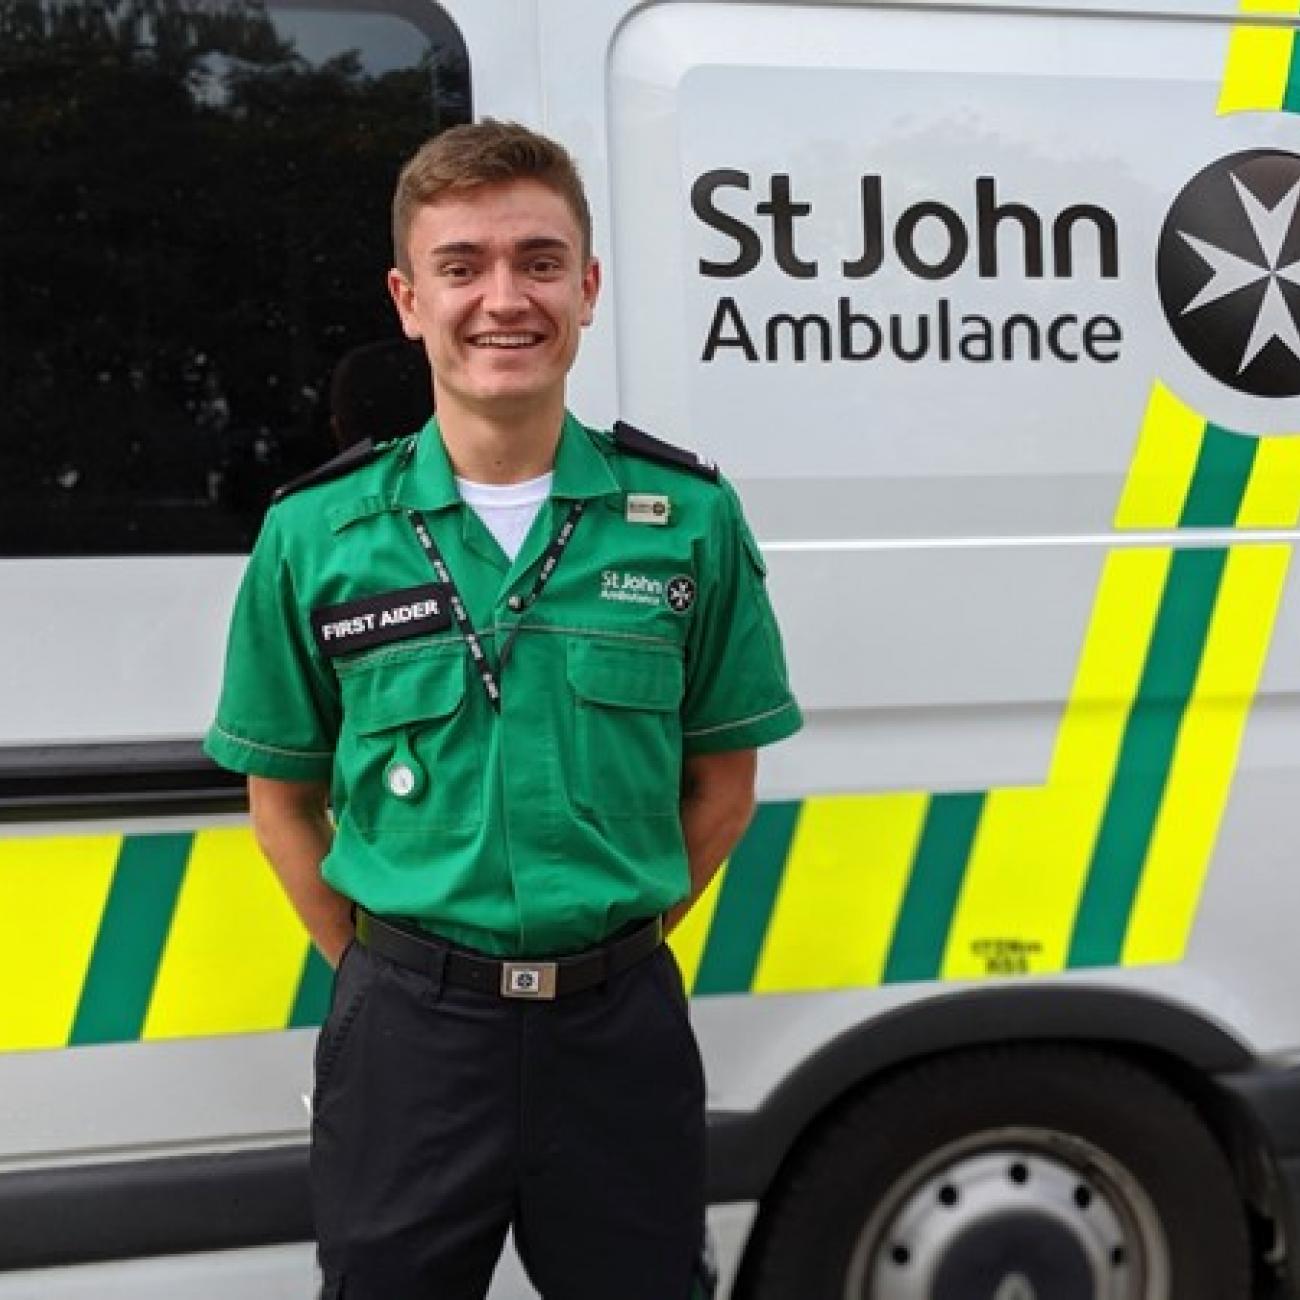 Thomas Edwards smiles as he stands next to an ambulance in his St John Ambulance uniform.